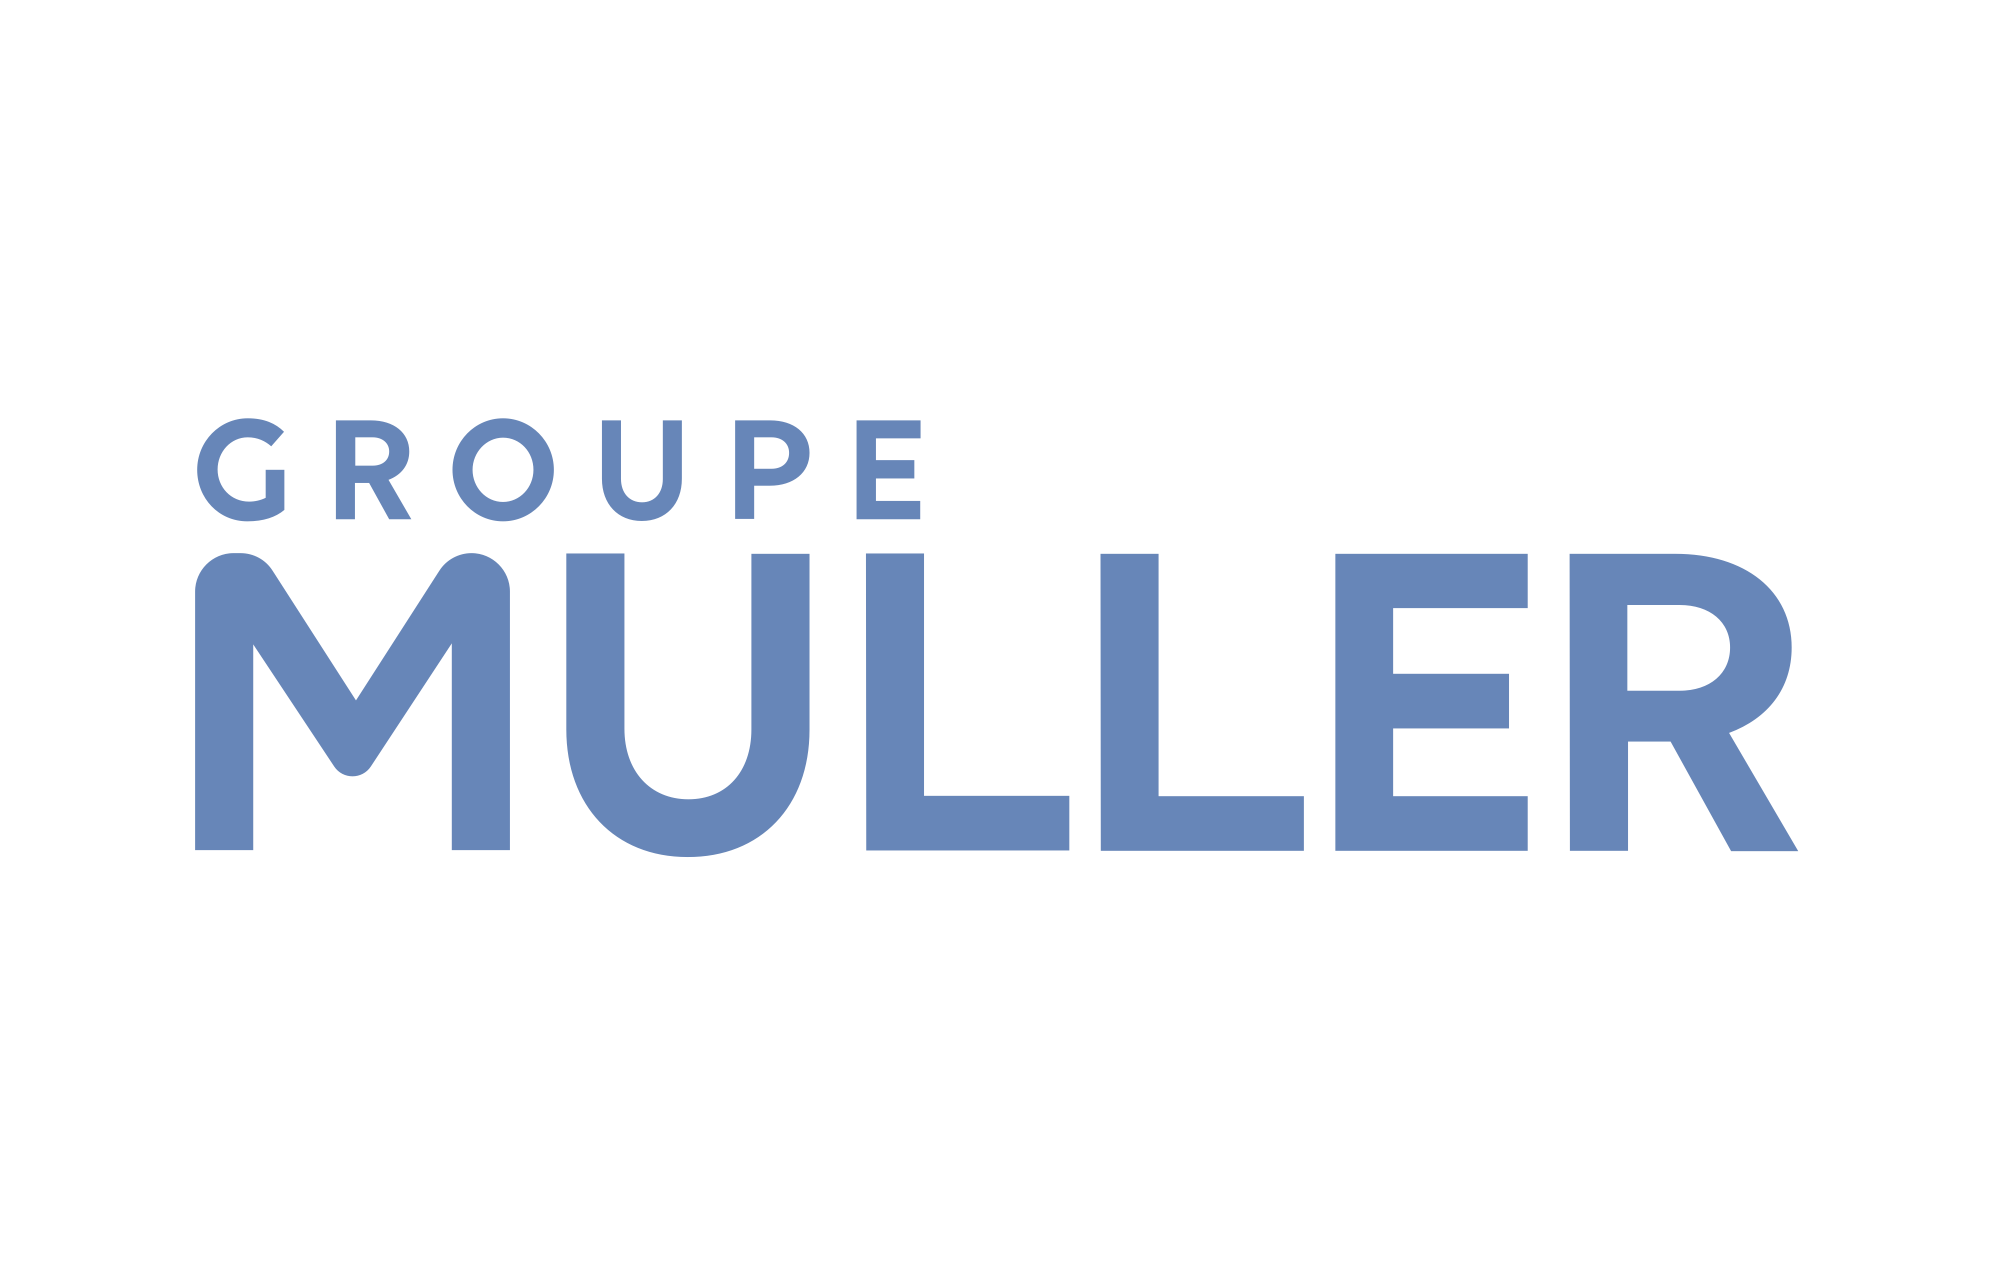 GROUPE MULLER